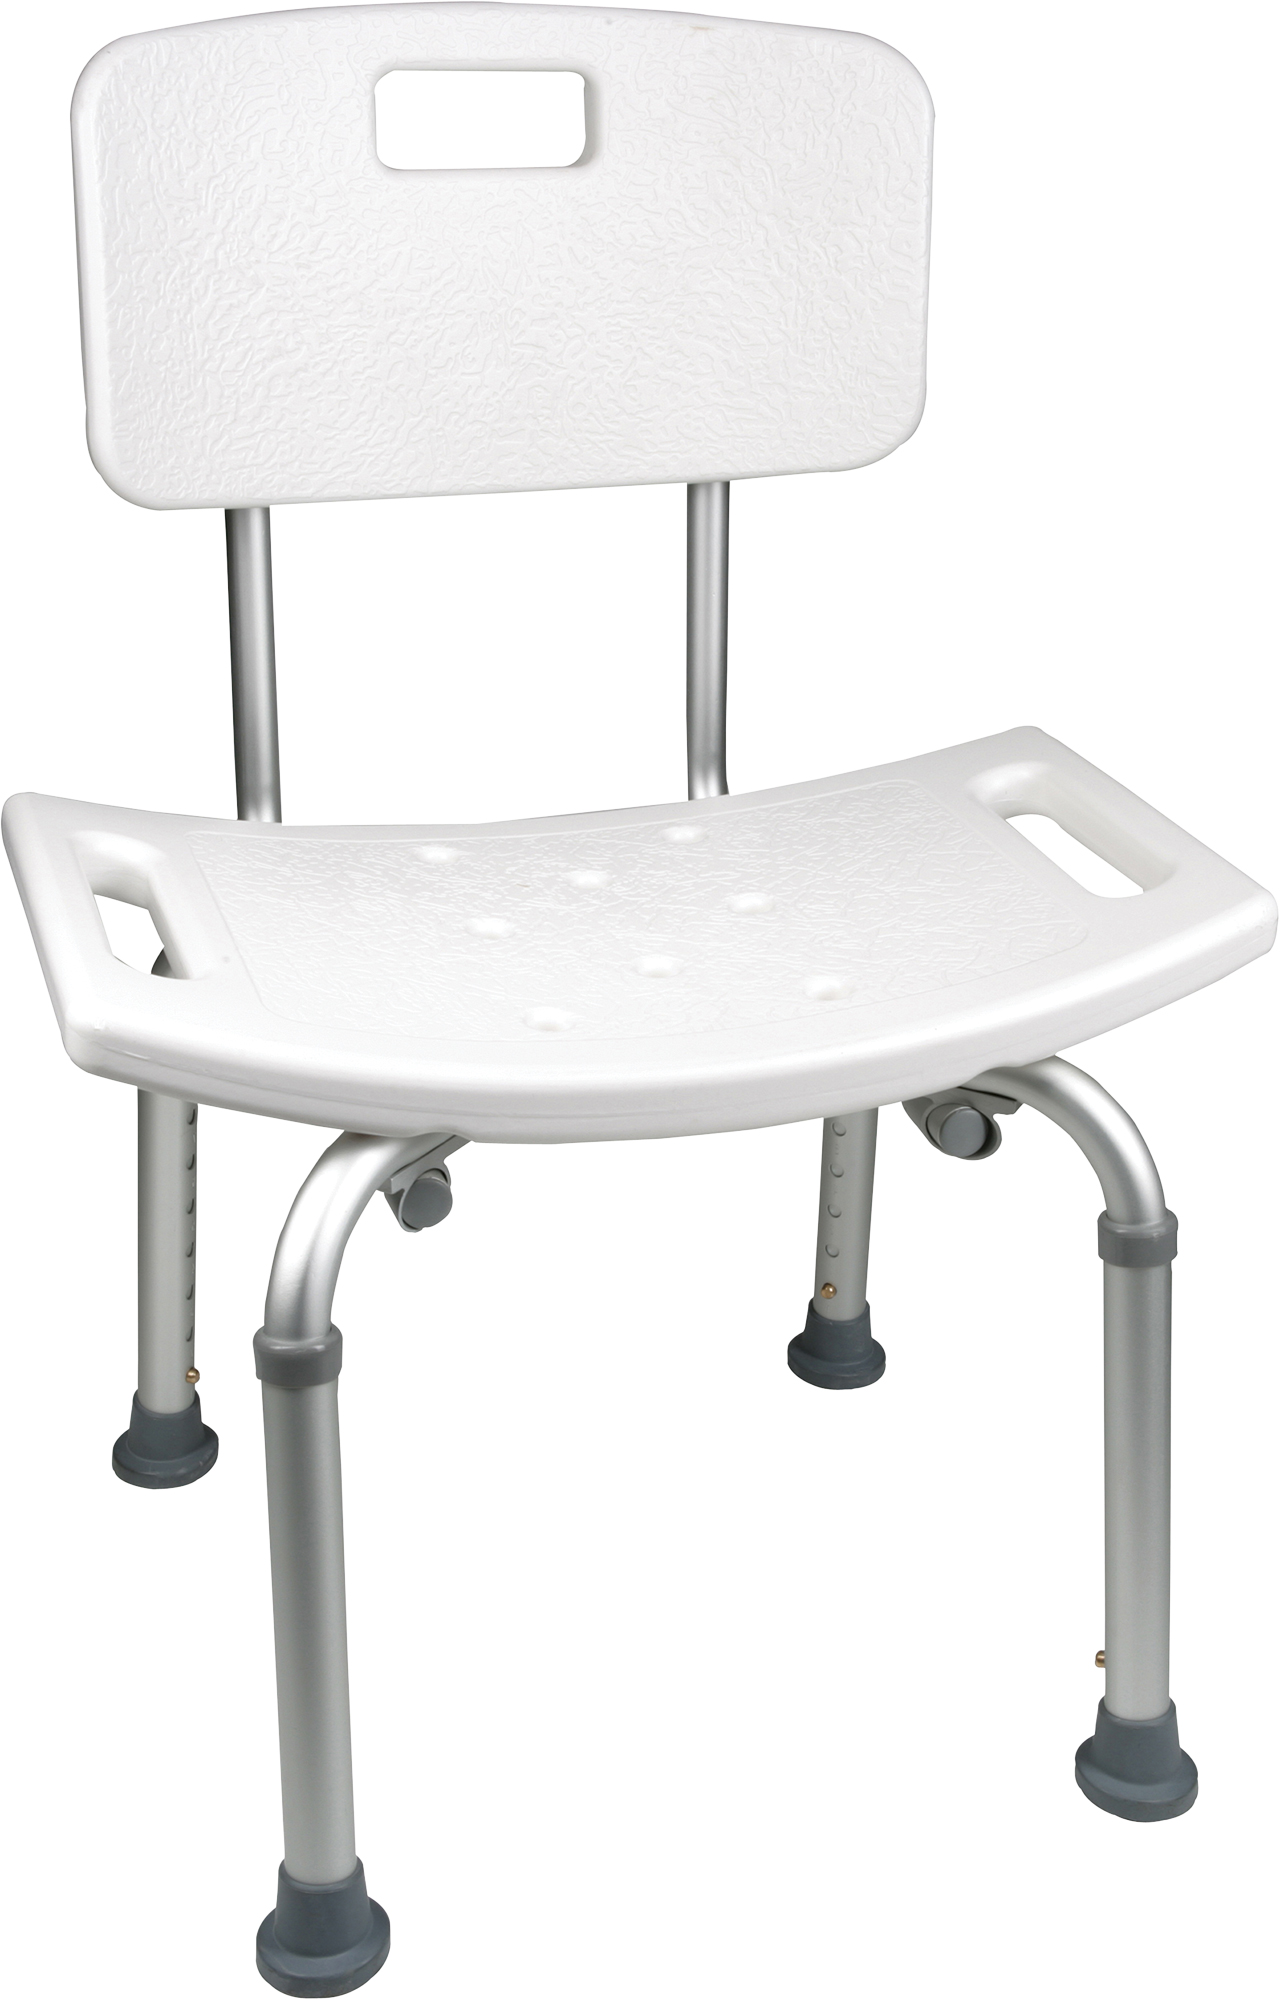 ProBasics Adjustable Shower Chair with Back, Case of 4